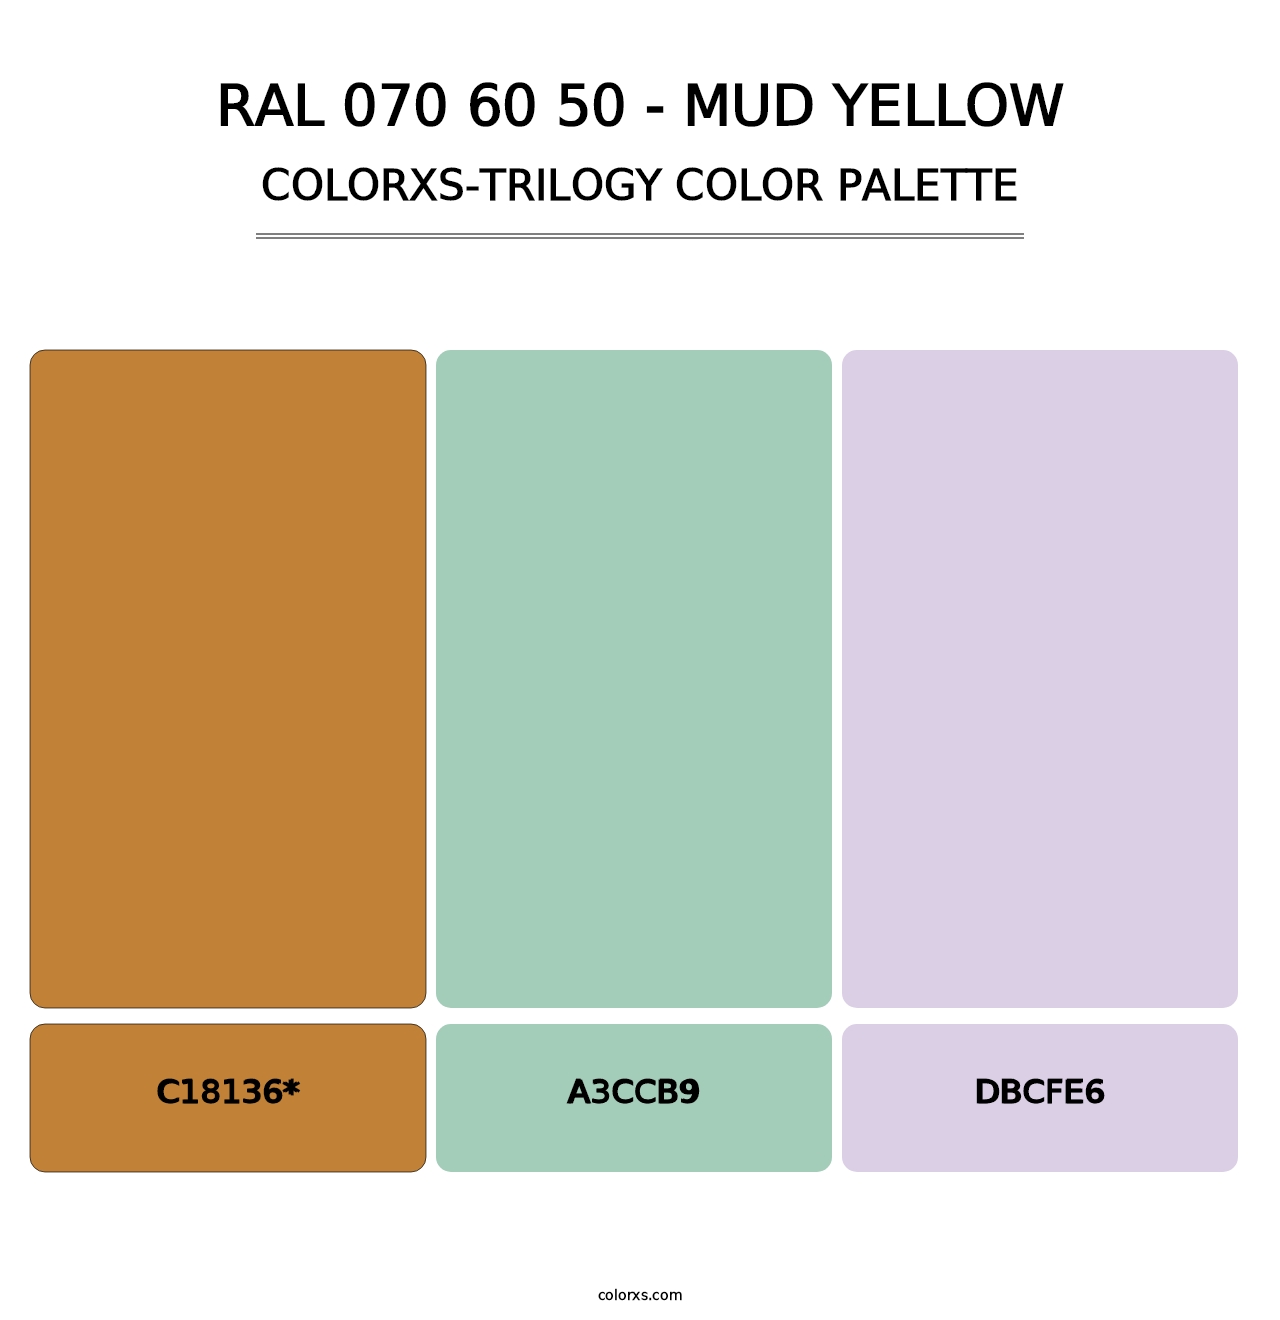 RAL 070 60 50 - Mud Yellow - Colorxs Trilogy Palette